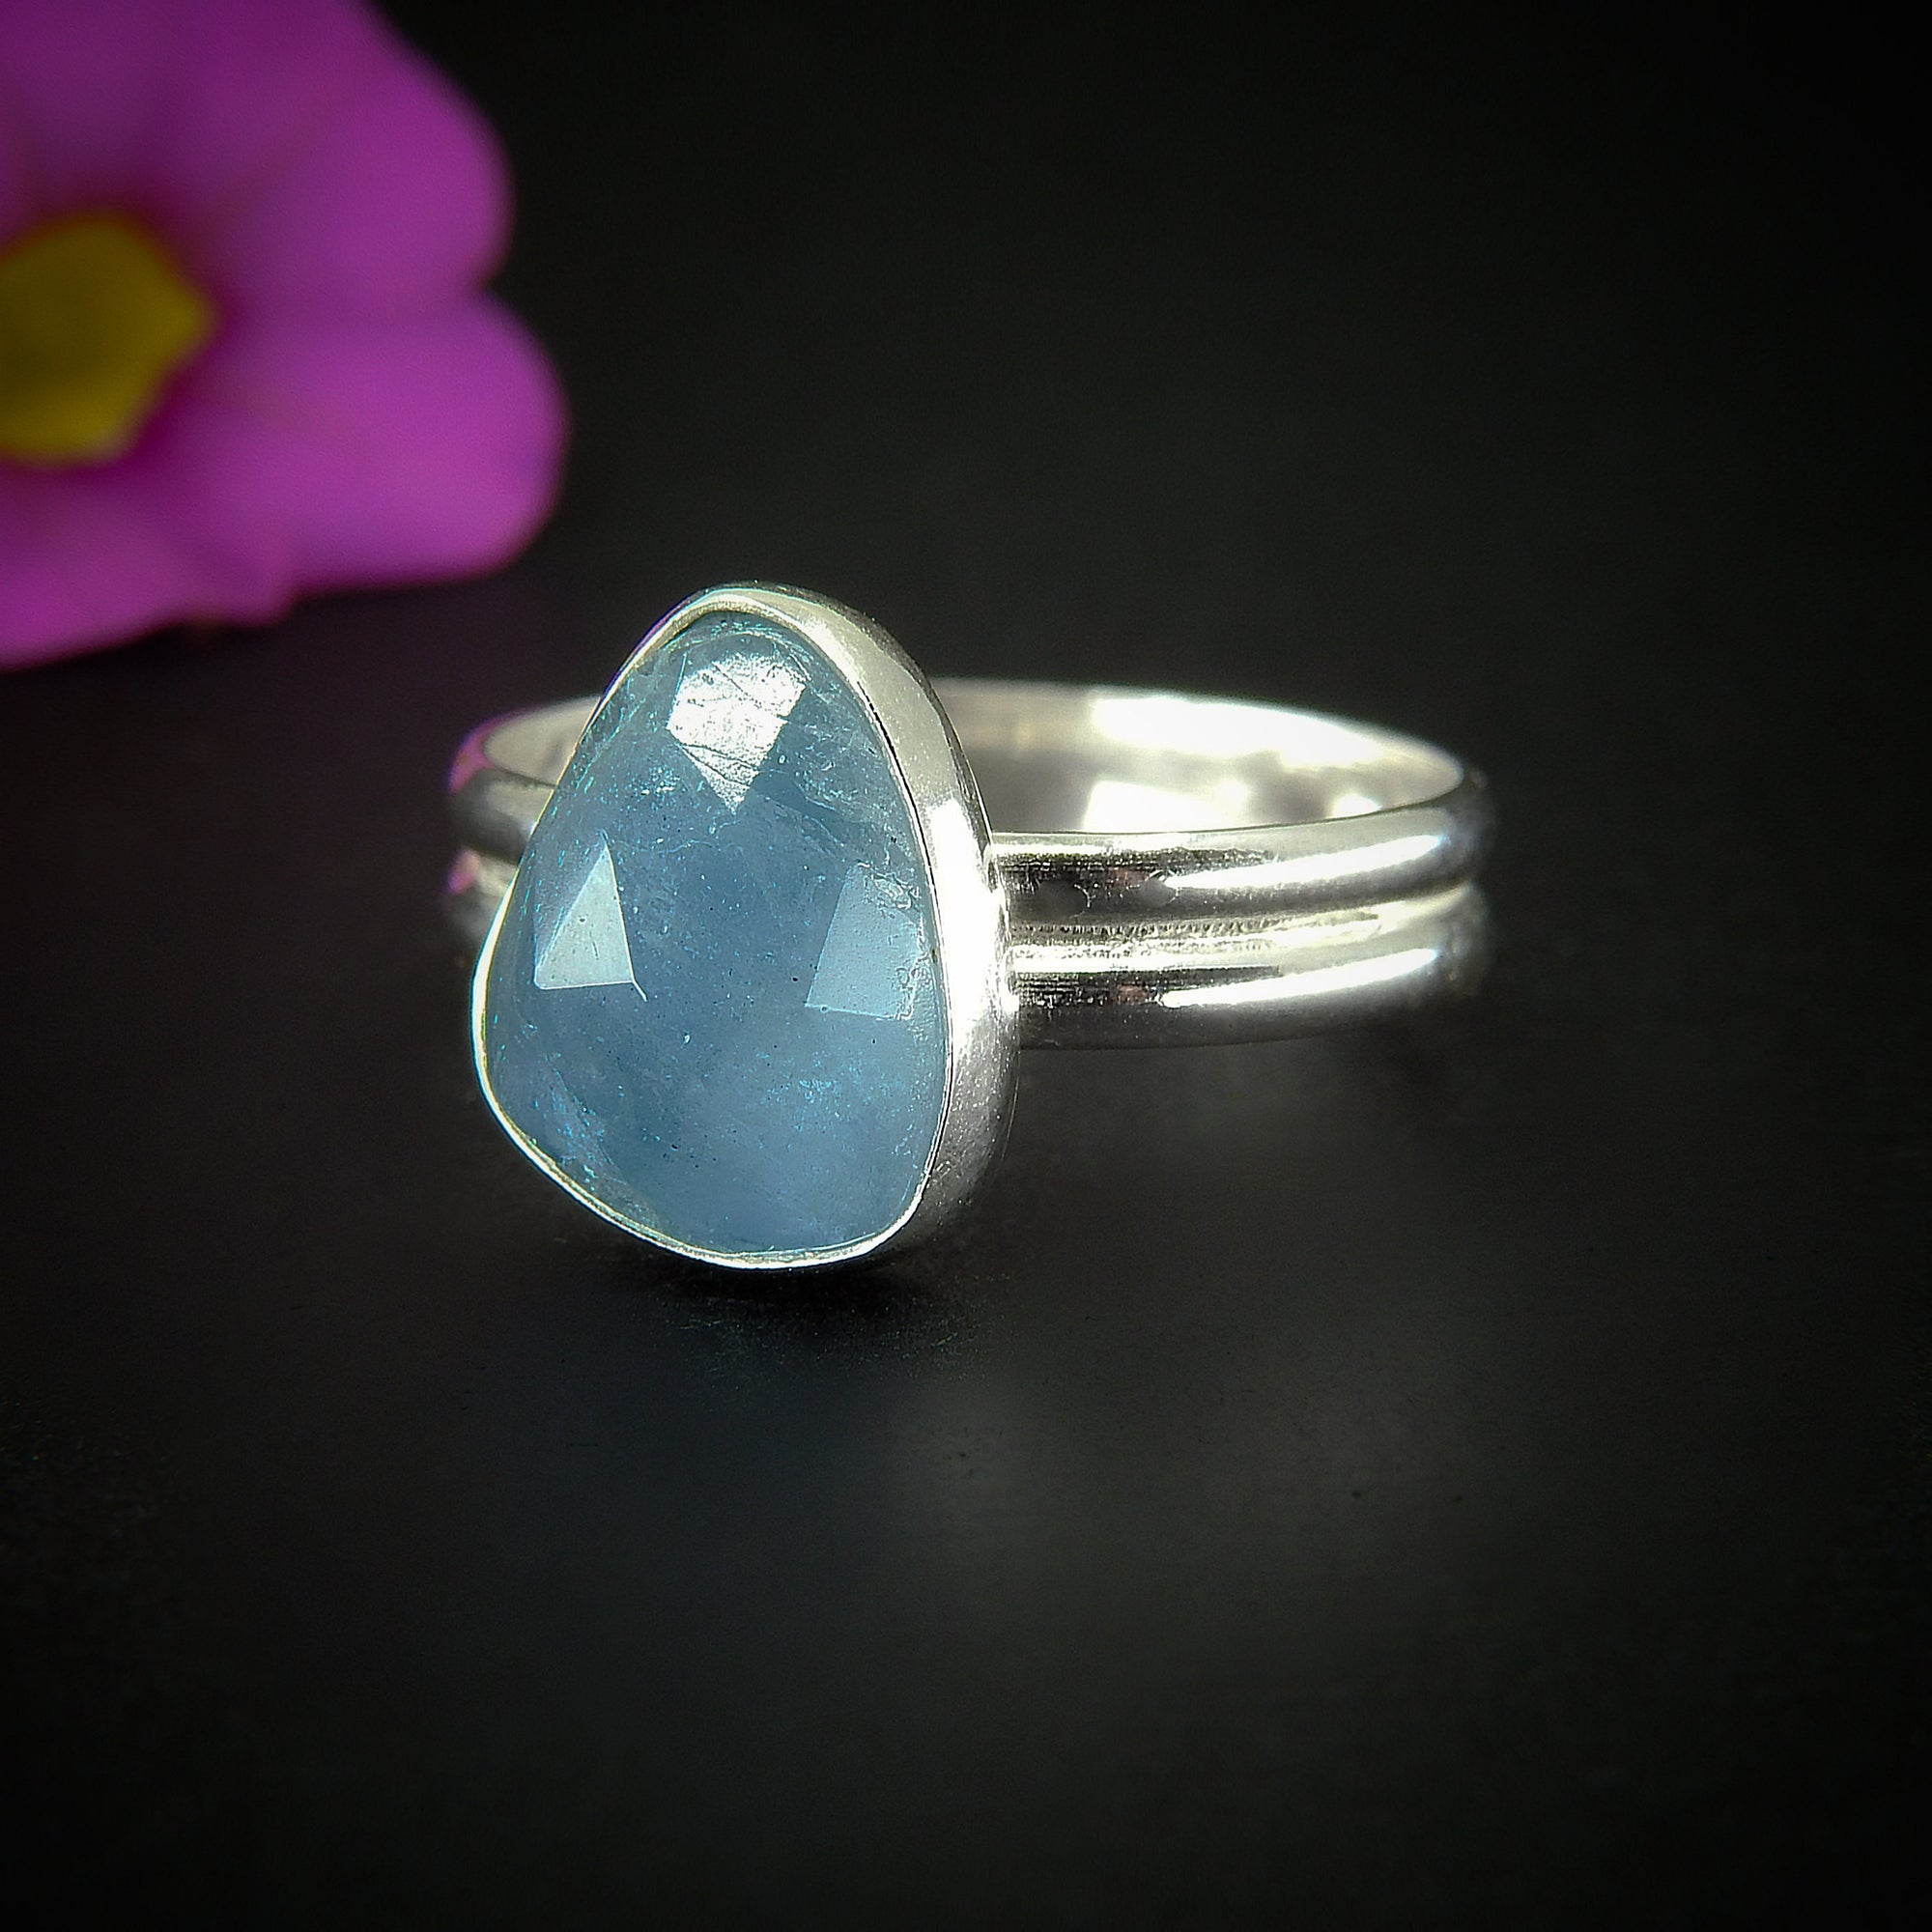 Rose Cut Aquamarine Ring - Size 9 - Sterling Silver - Aquamarine Jewellery - Blue Aquamarine Ring - Unique Aquamarine Statement Ring OOAK